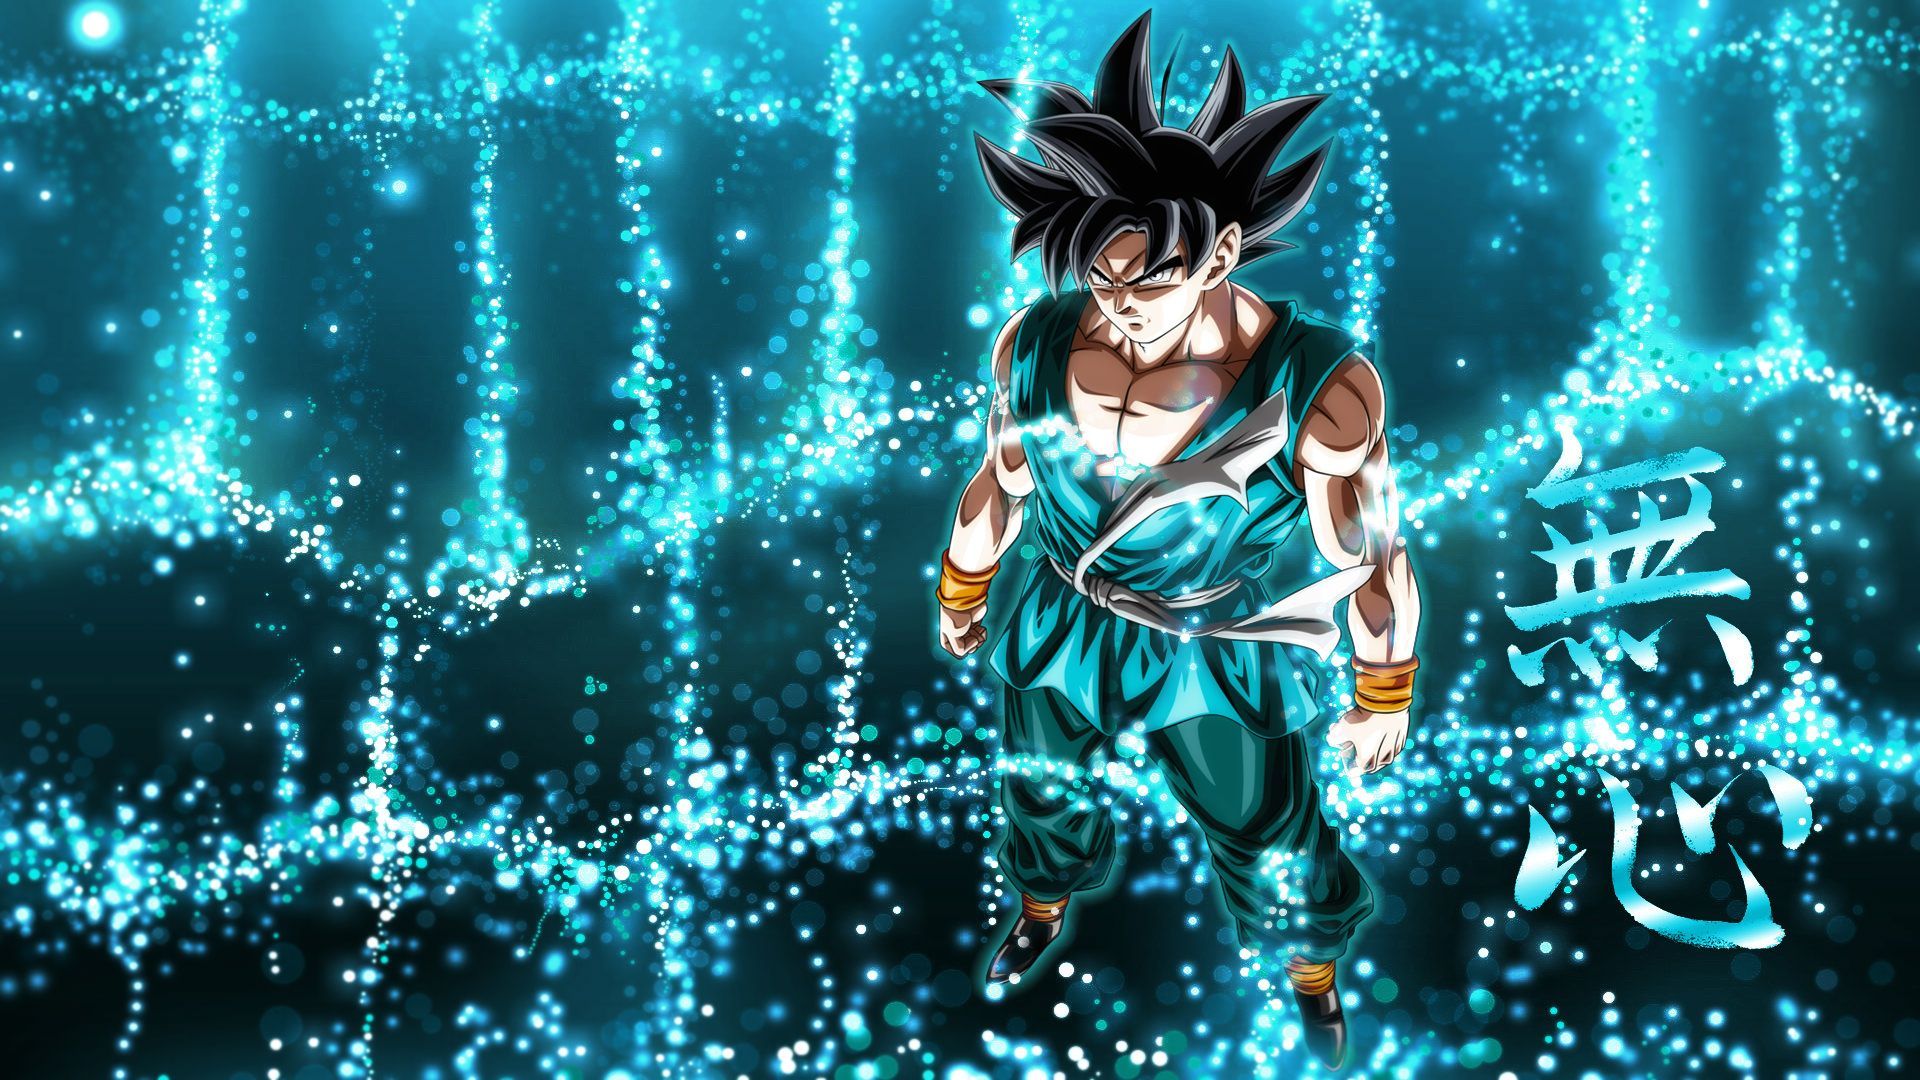 Super Dragon Ball 1920X1080 Wallpapers on